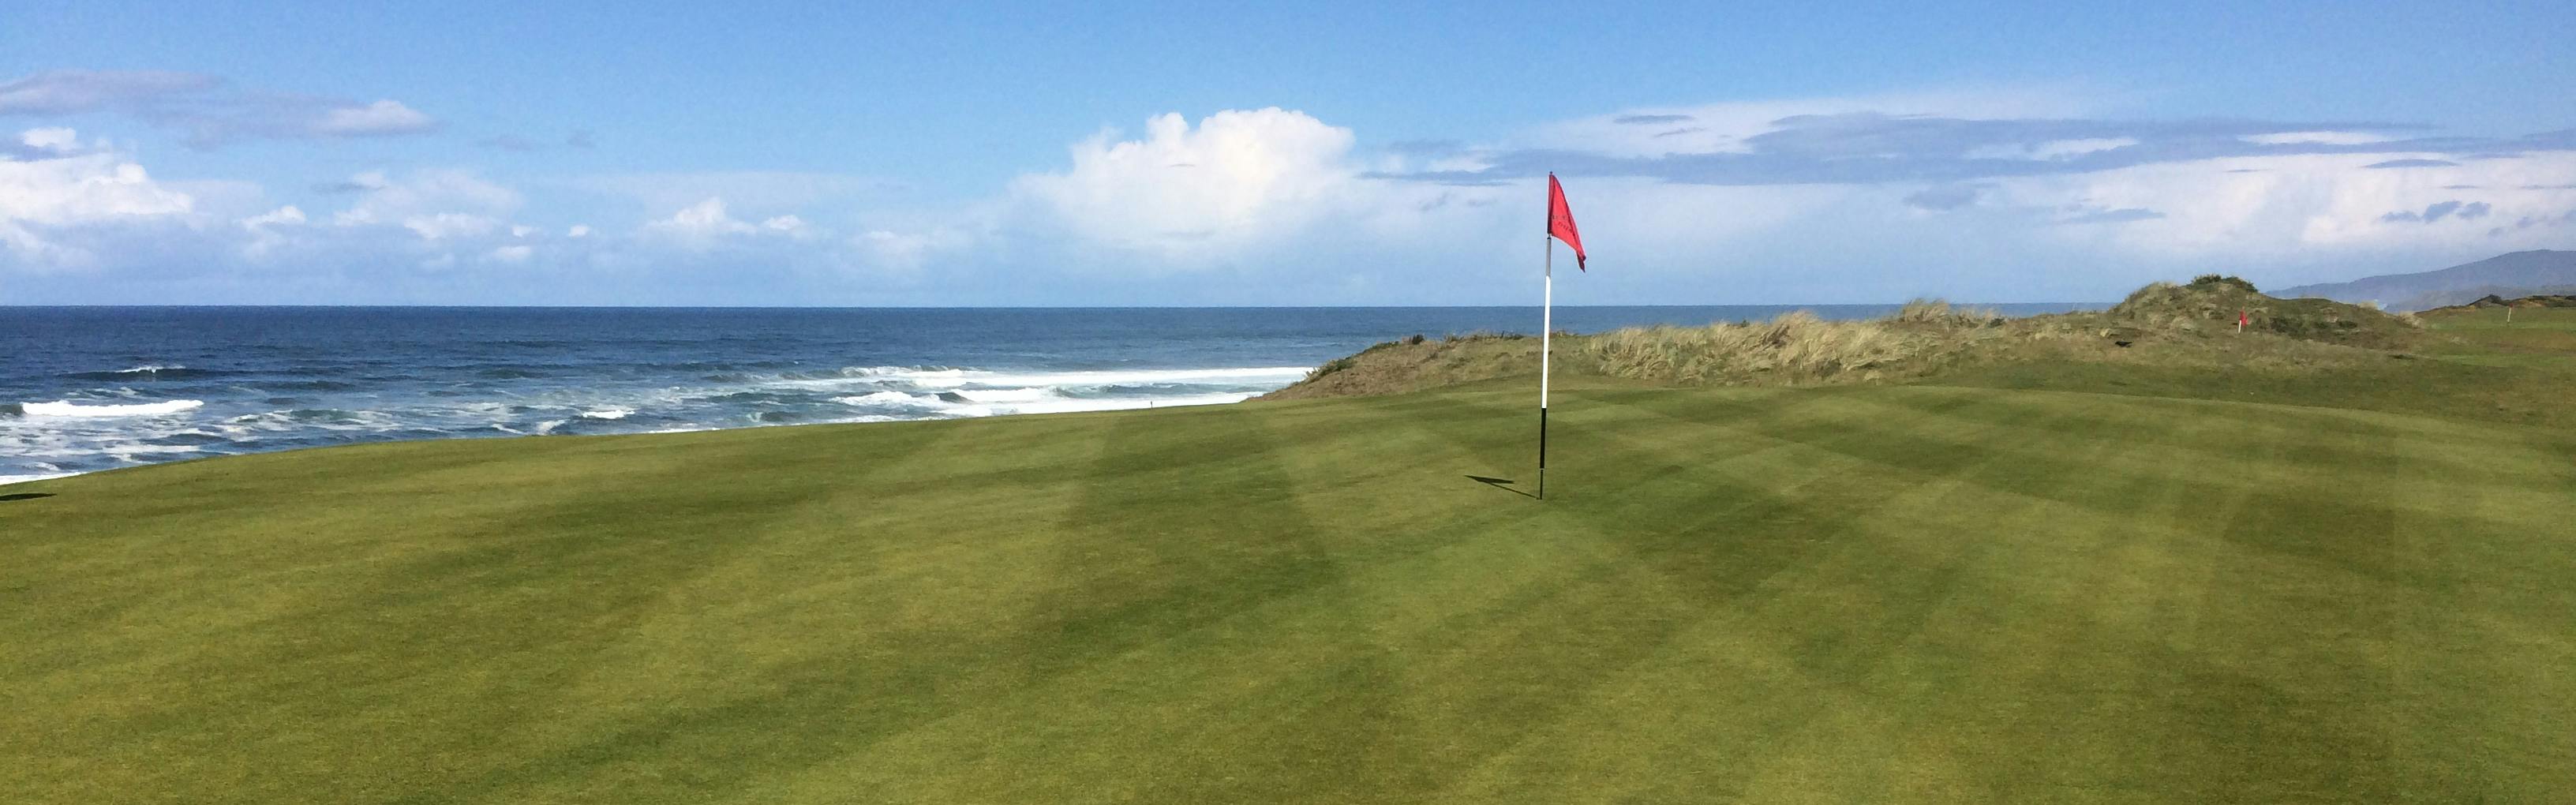 A flag on a golf course with the ocean in the background